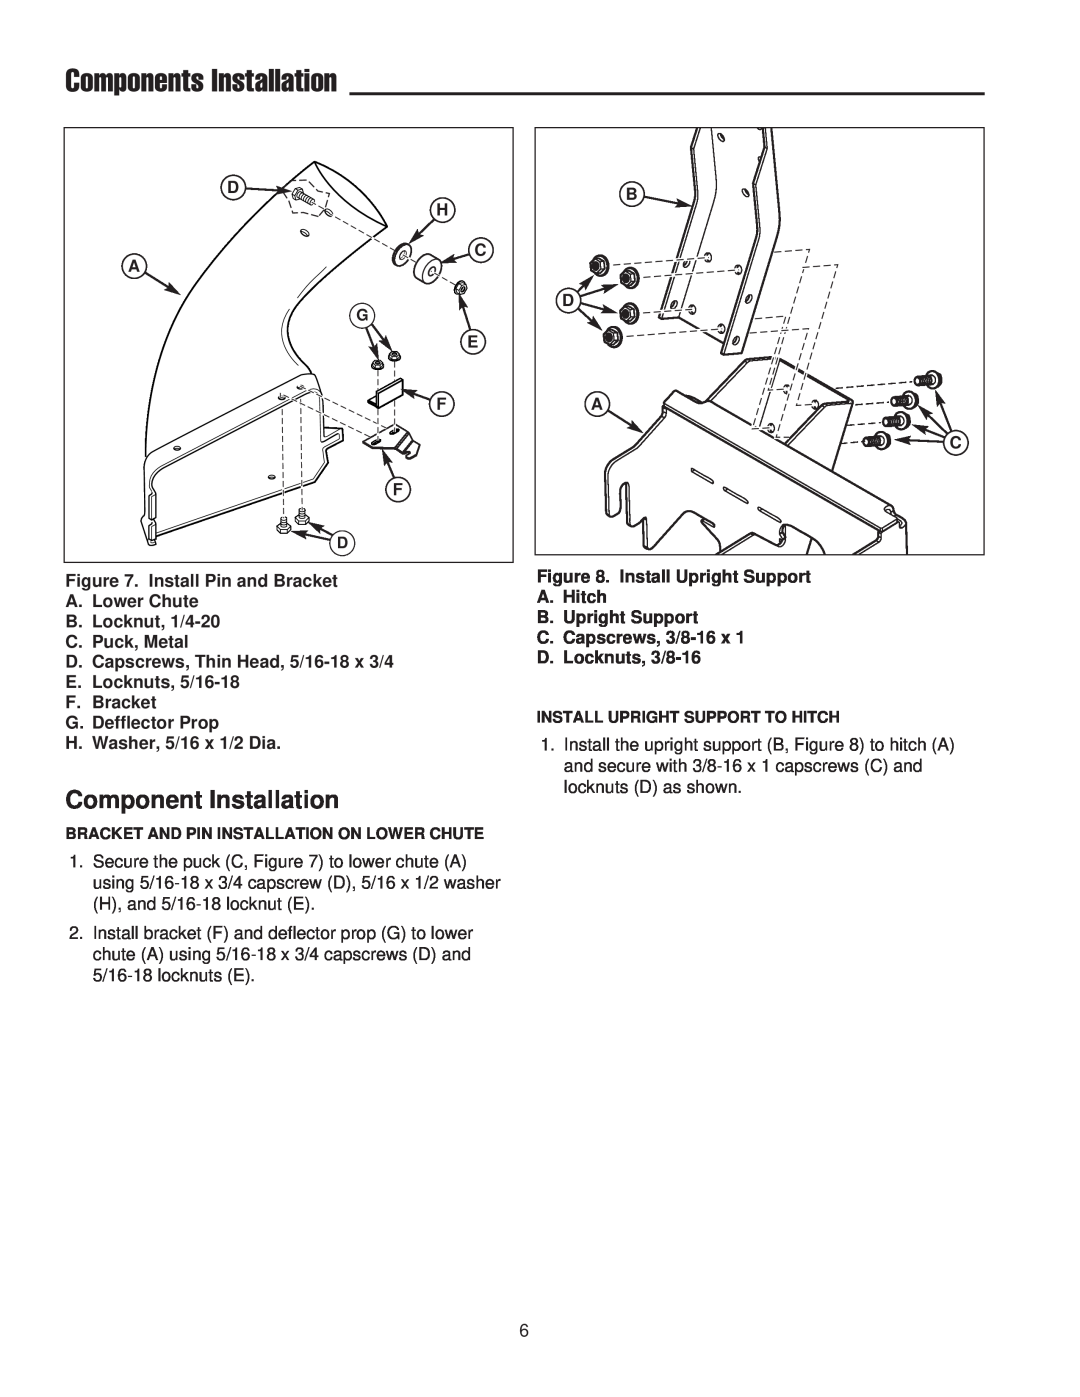 Snapper 1733729, 1695168 manual Components Installation, Component Installation 